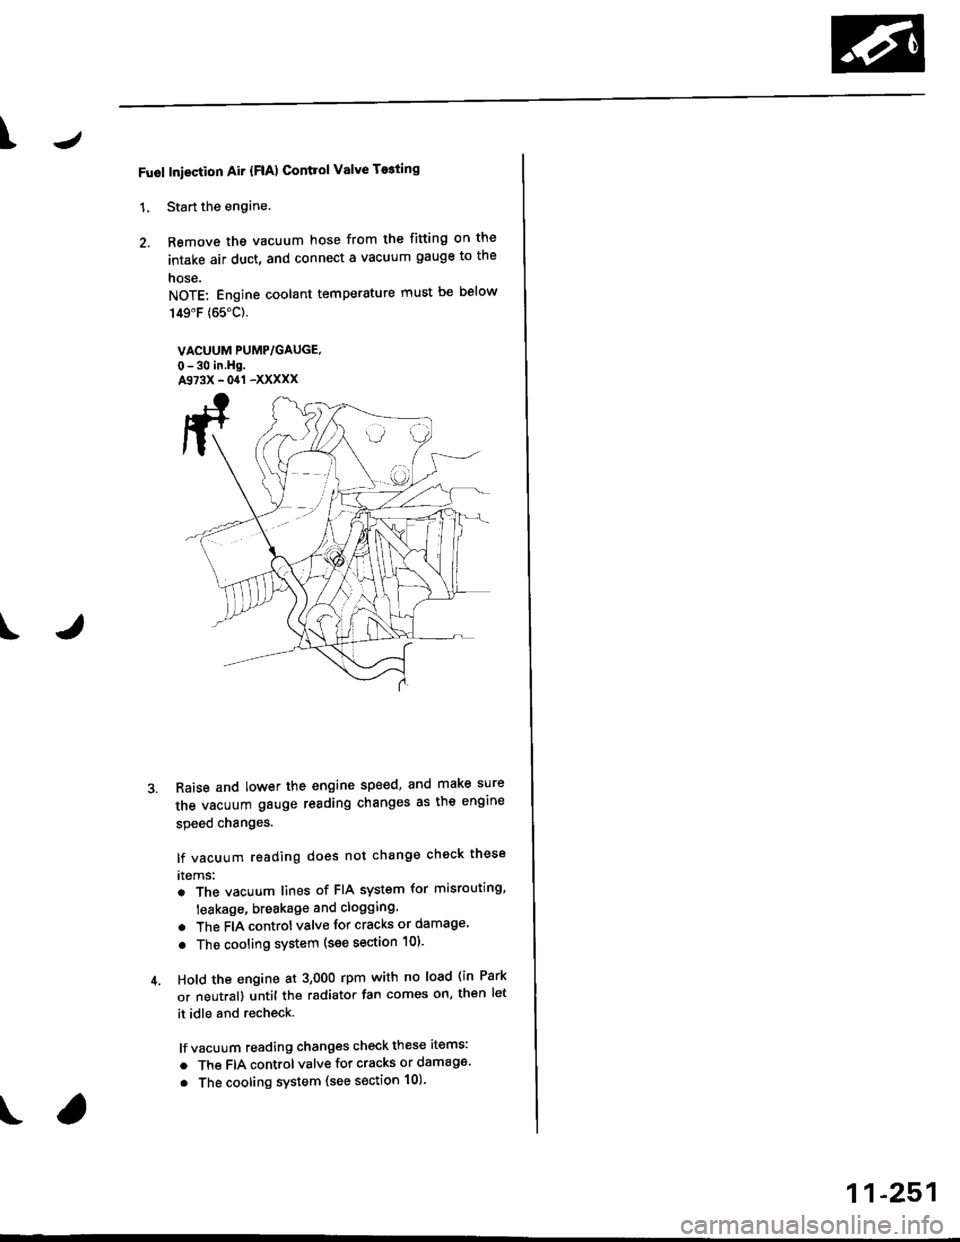 HONDA CIVIC 1996 6.G Owners Guide \J
Fuol Iniection Air {FlA) Contlol Valve T$ting
1. Start the engine.
2. Remove the vacuum hose from the fitting on the
intake air duct, and connect a vacuum gauge to the
nose.
NOTE: Engine coolant te